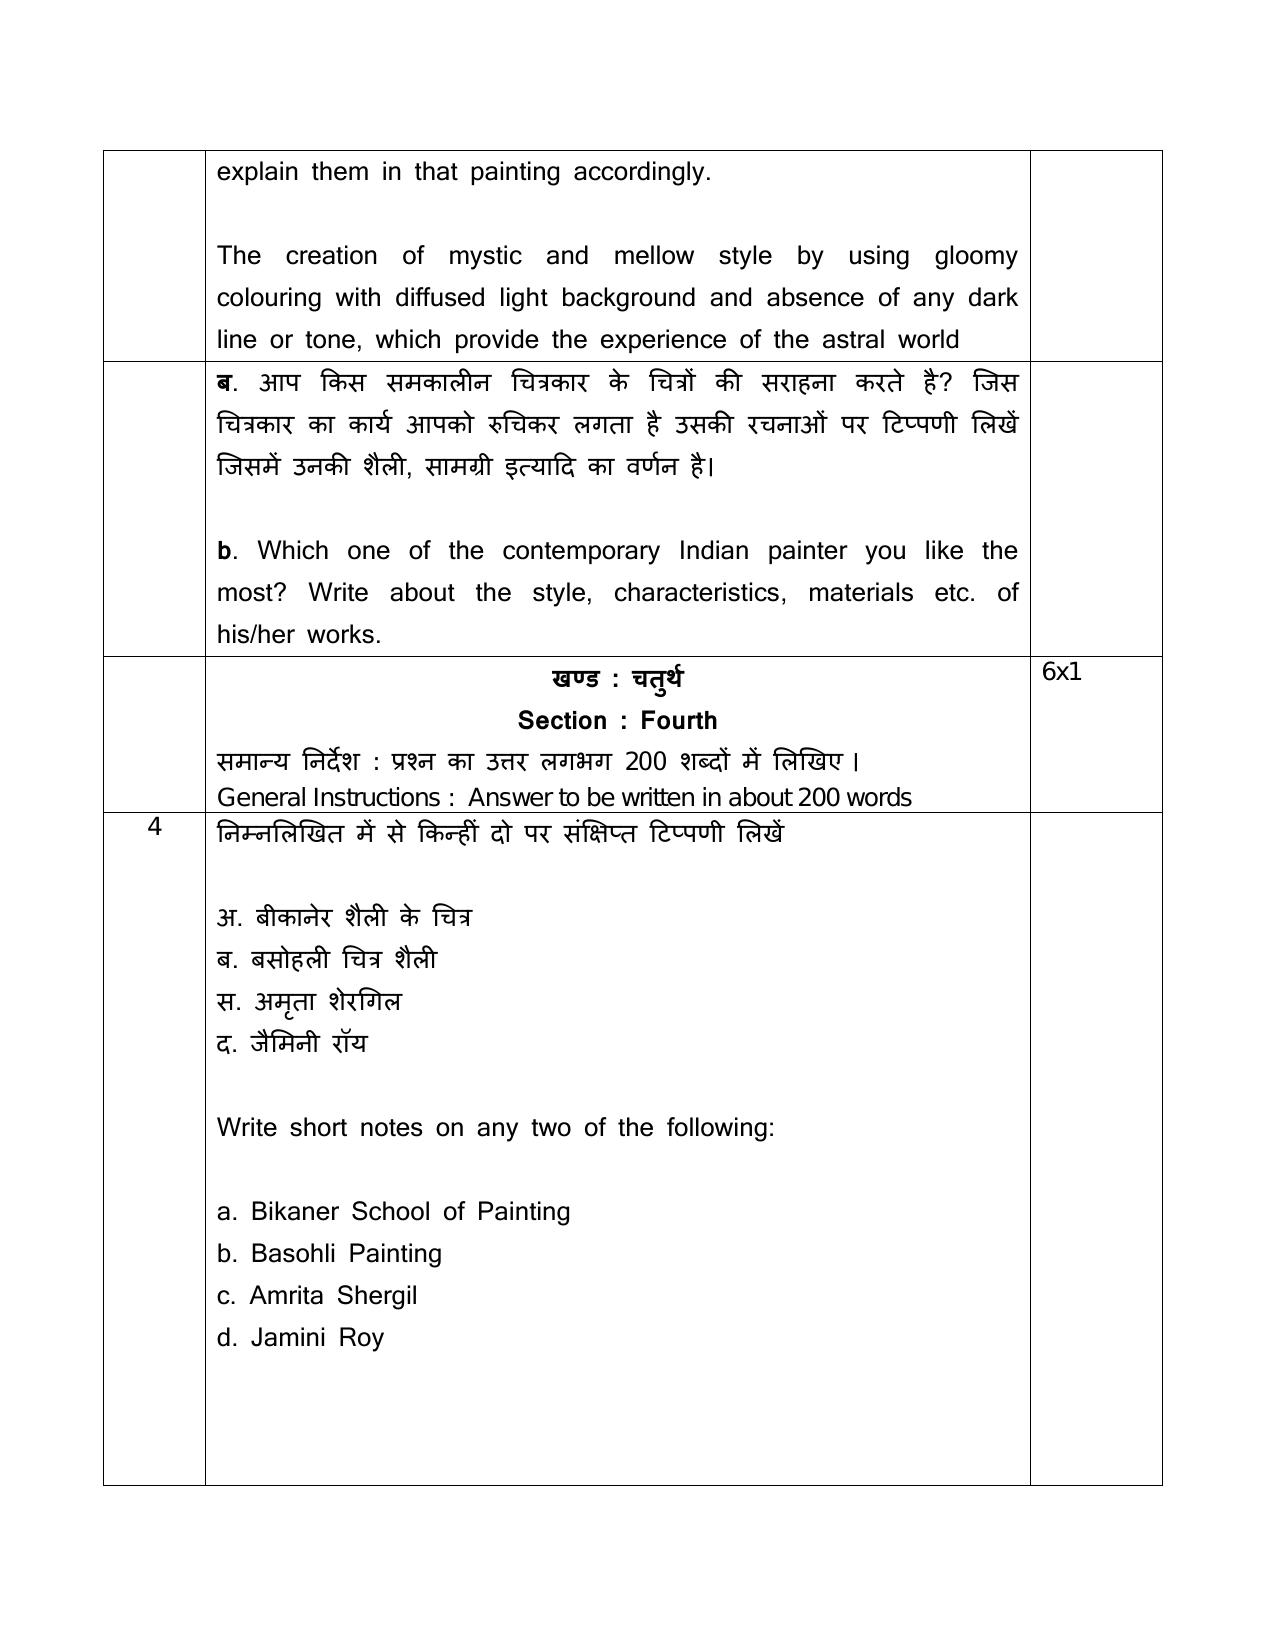 CBSE Class 12 Painting -Sample Paper 2019-20 - Page 5